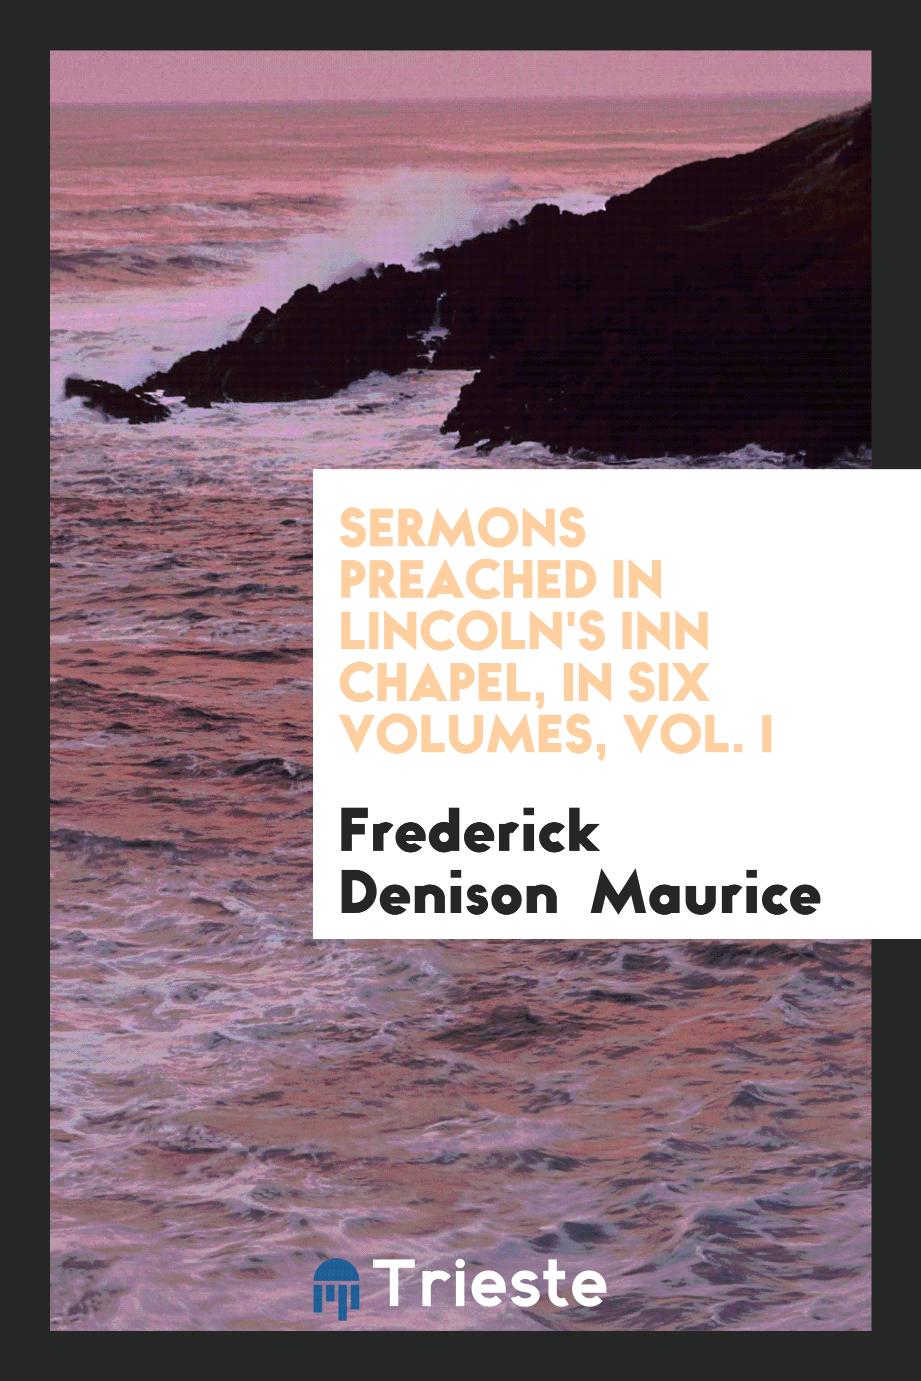 Frederick Denison Maurice - Sermons Preached in Lincoln's Inn Chapel, in Six Volumes, Vol. I